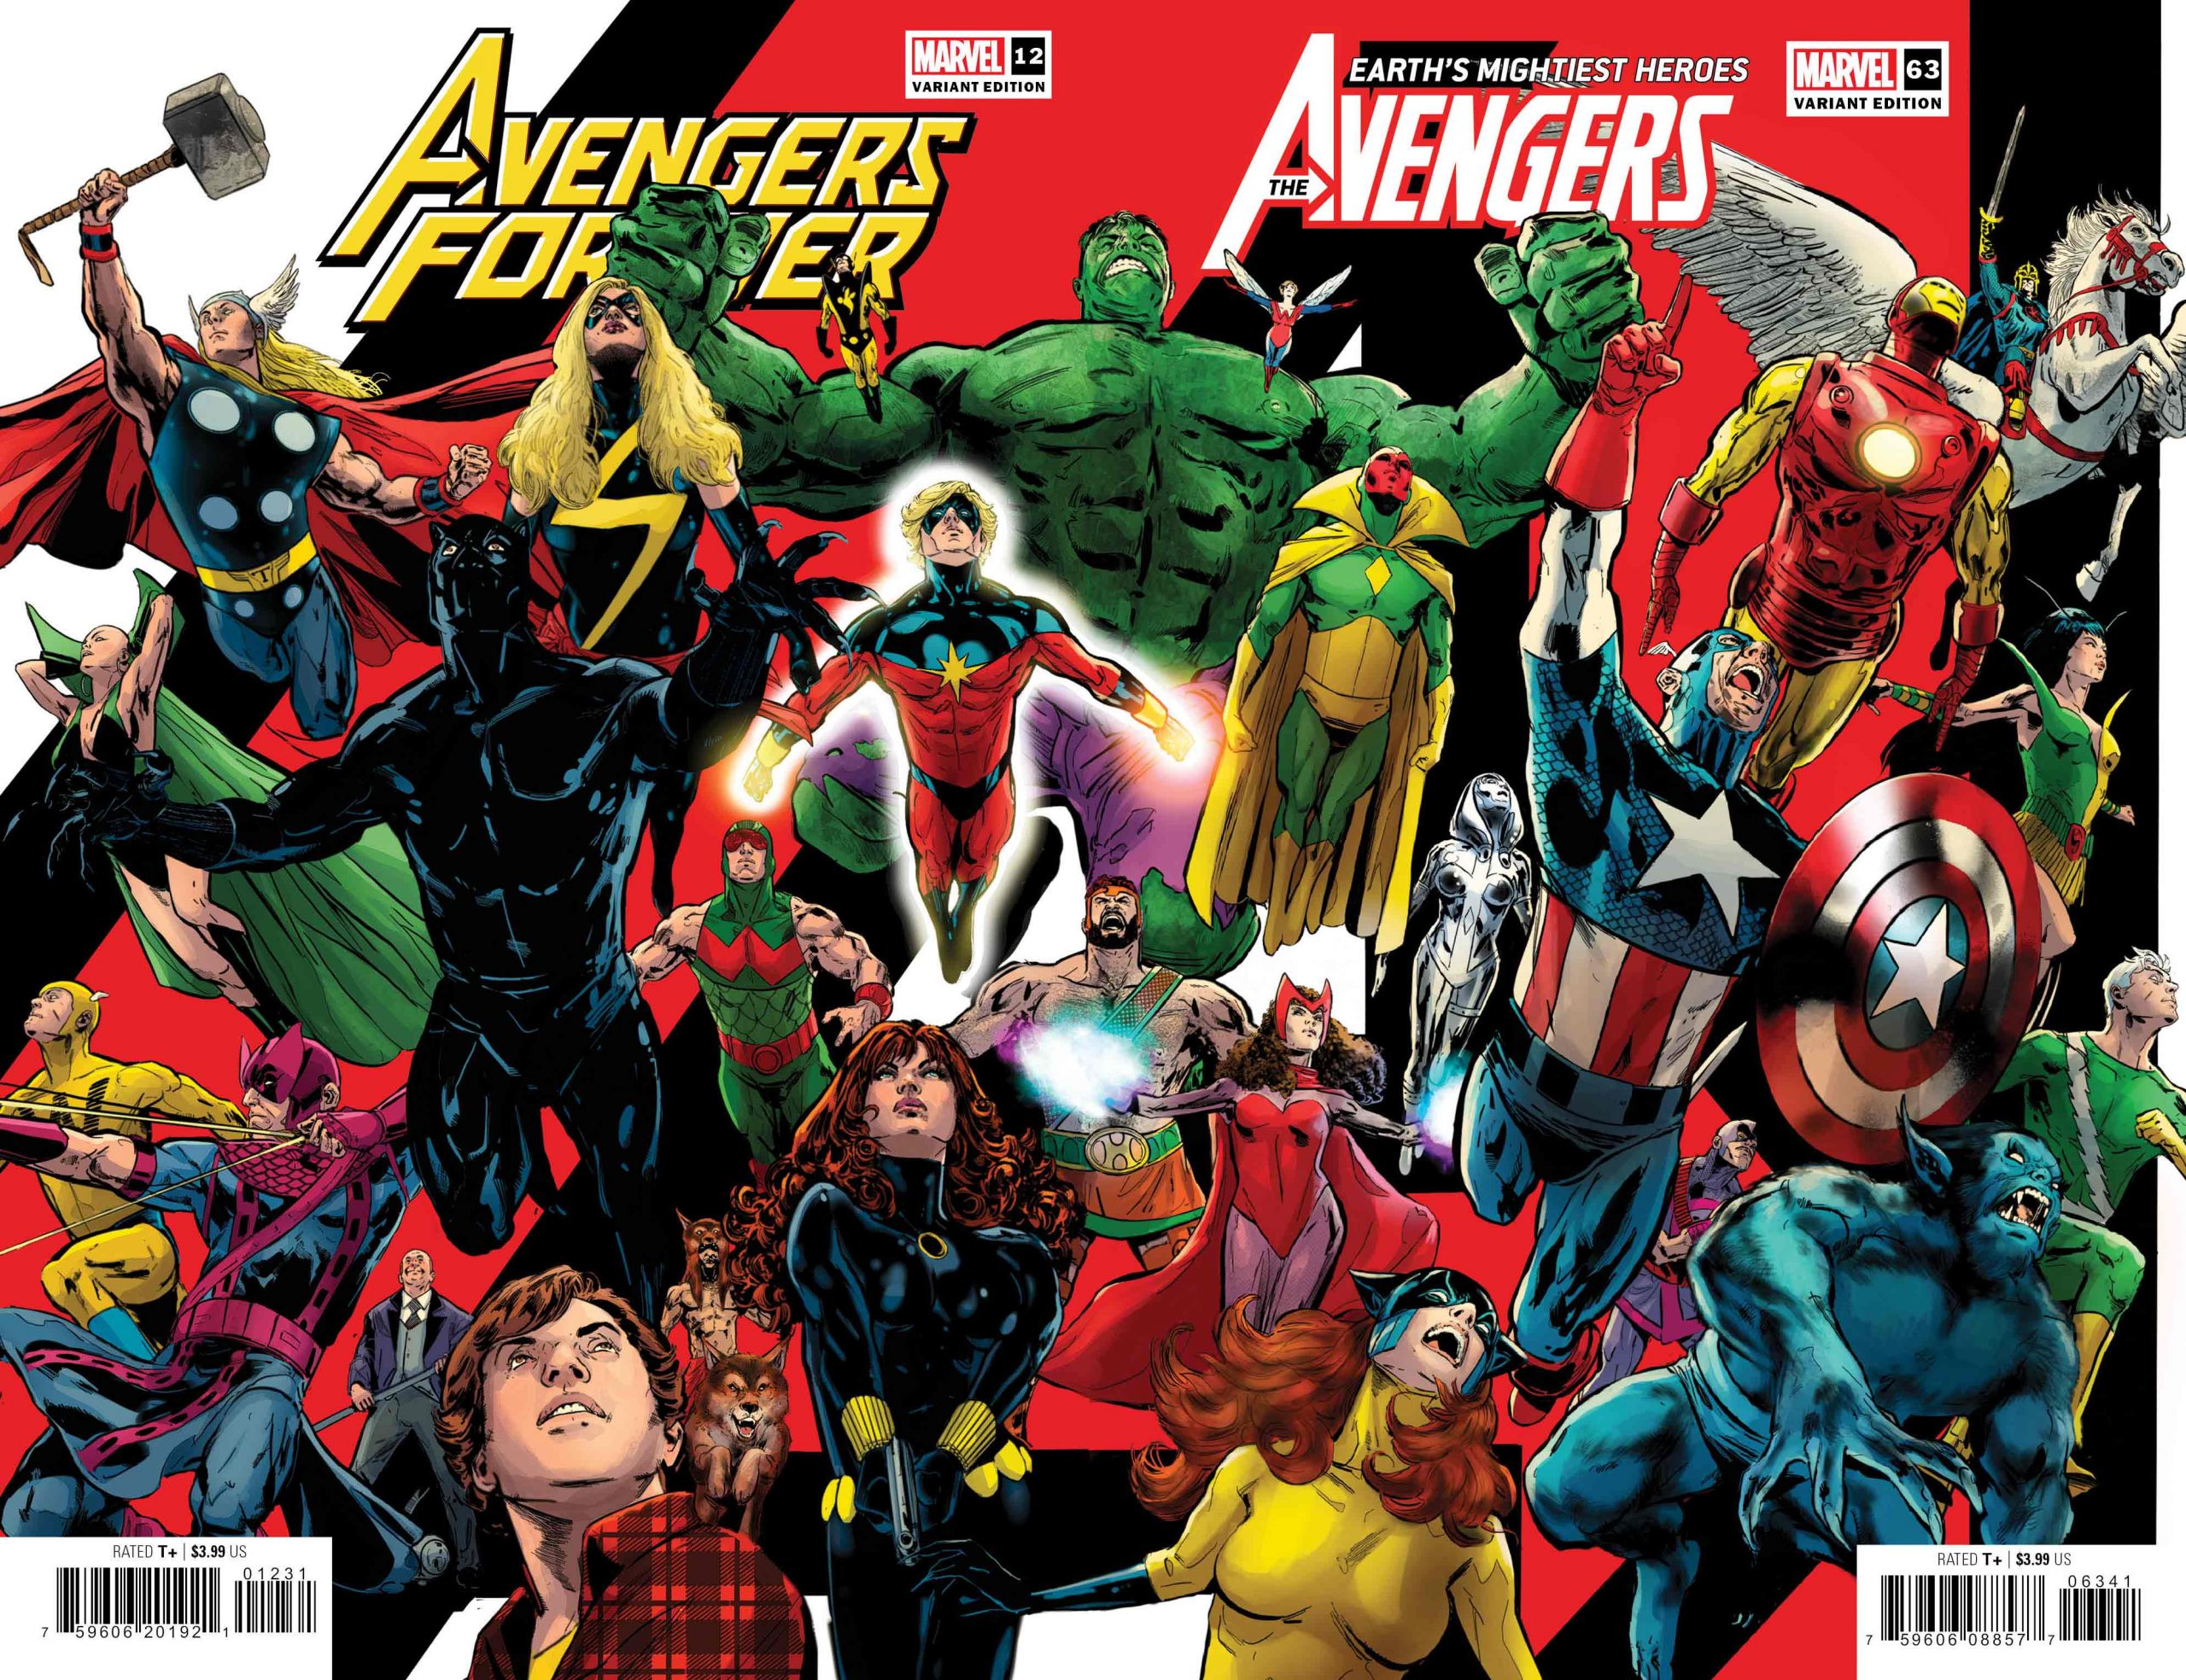 Phil Jimenez pays homage to the Bronze Age with first of four 'Avengers Assemble' connecting covers